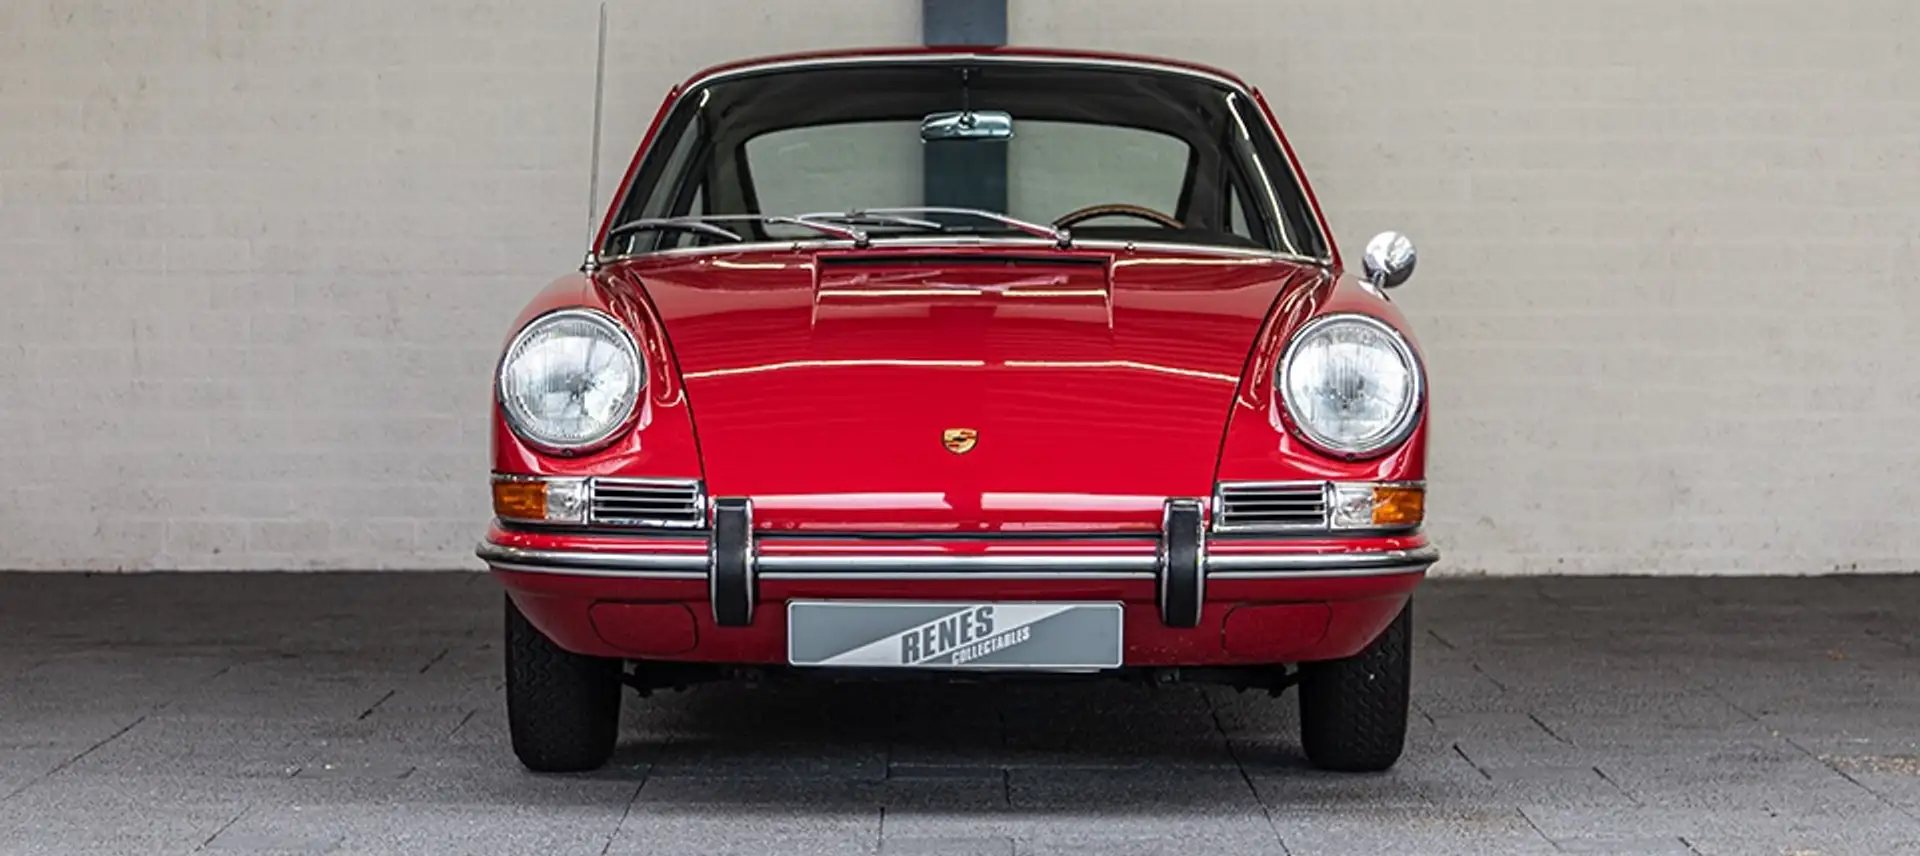 Porsche 911 1965 911 Matching Numbers German first delivery Rosso - 2